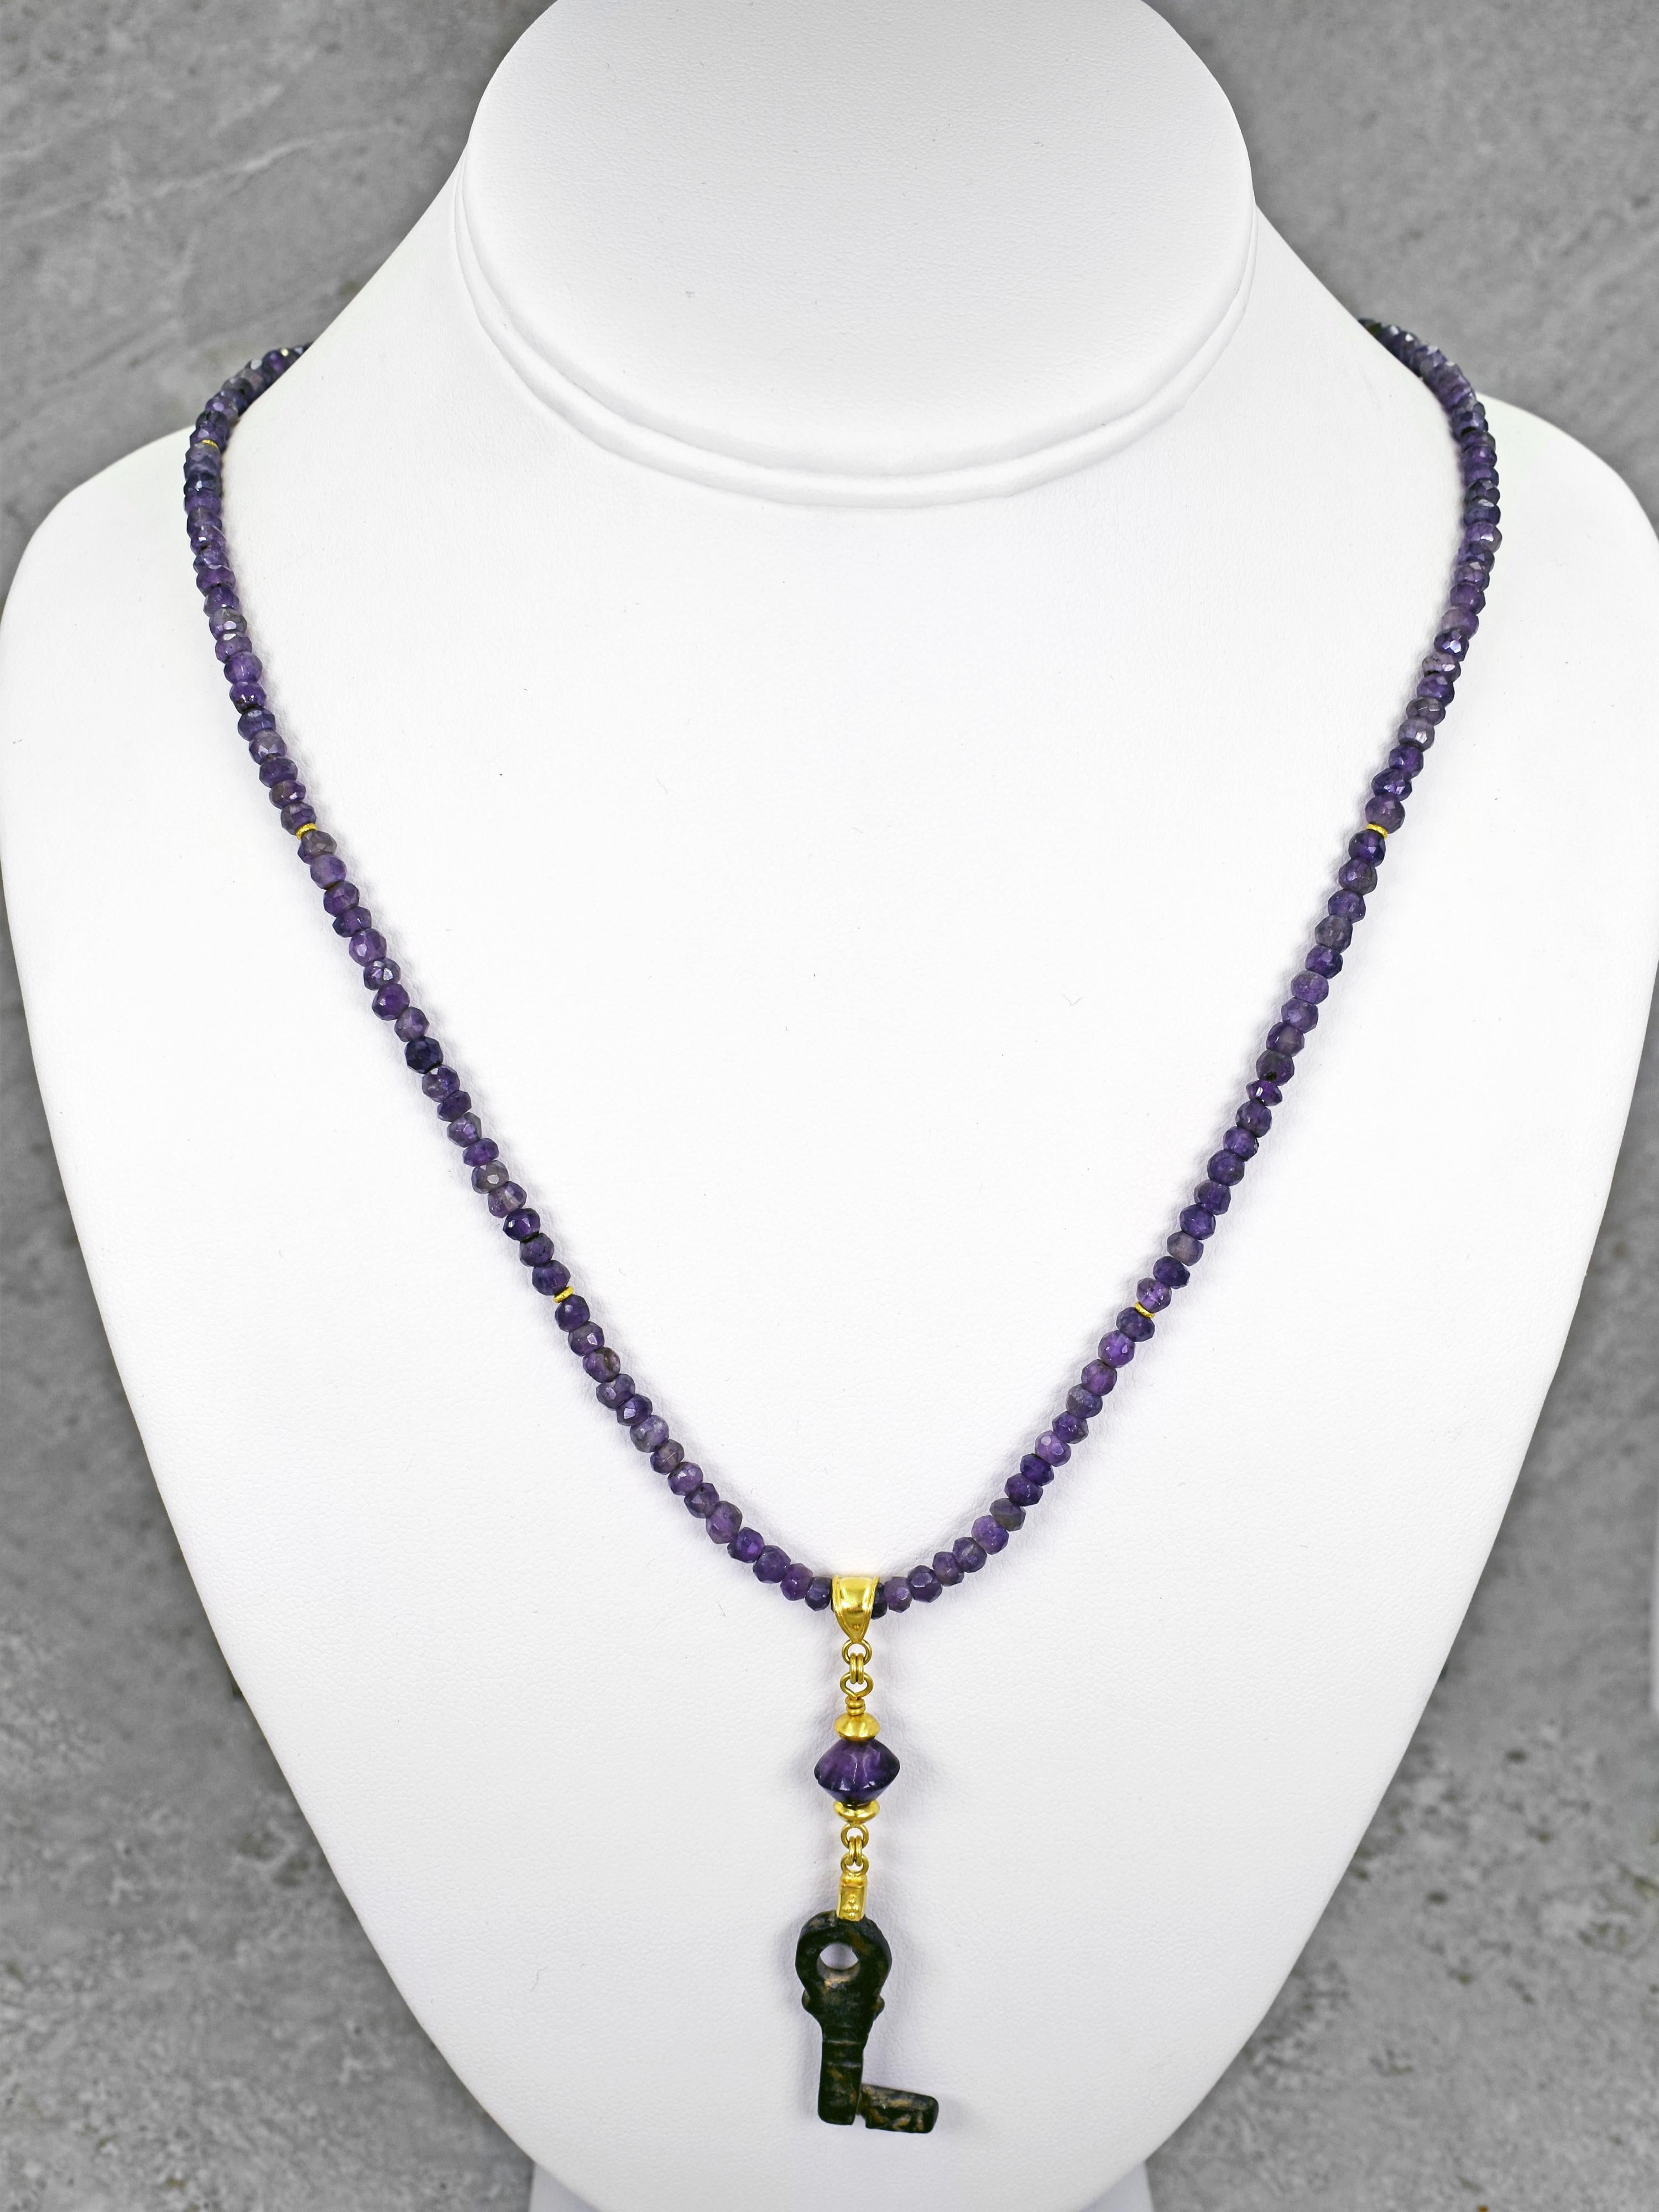 Amethyst, Ancient Roman Bronze Key and 22 Karat Gold Beaded Pendant Necklace In New Condition For Sale In Naples, FL